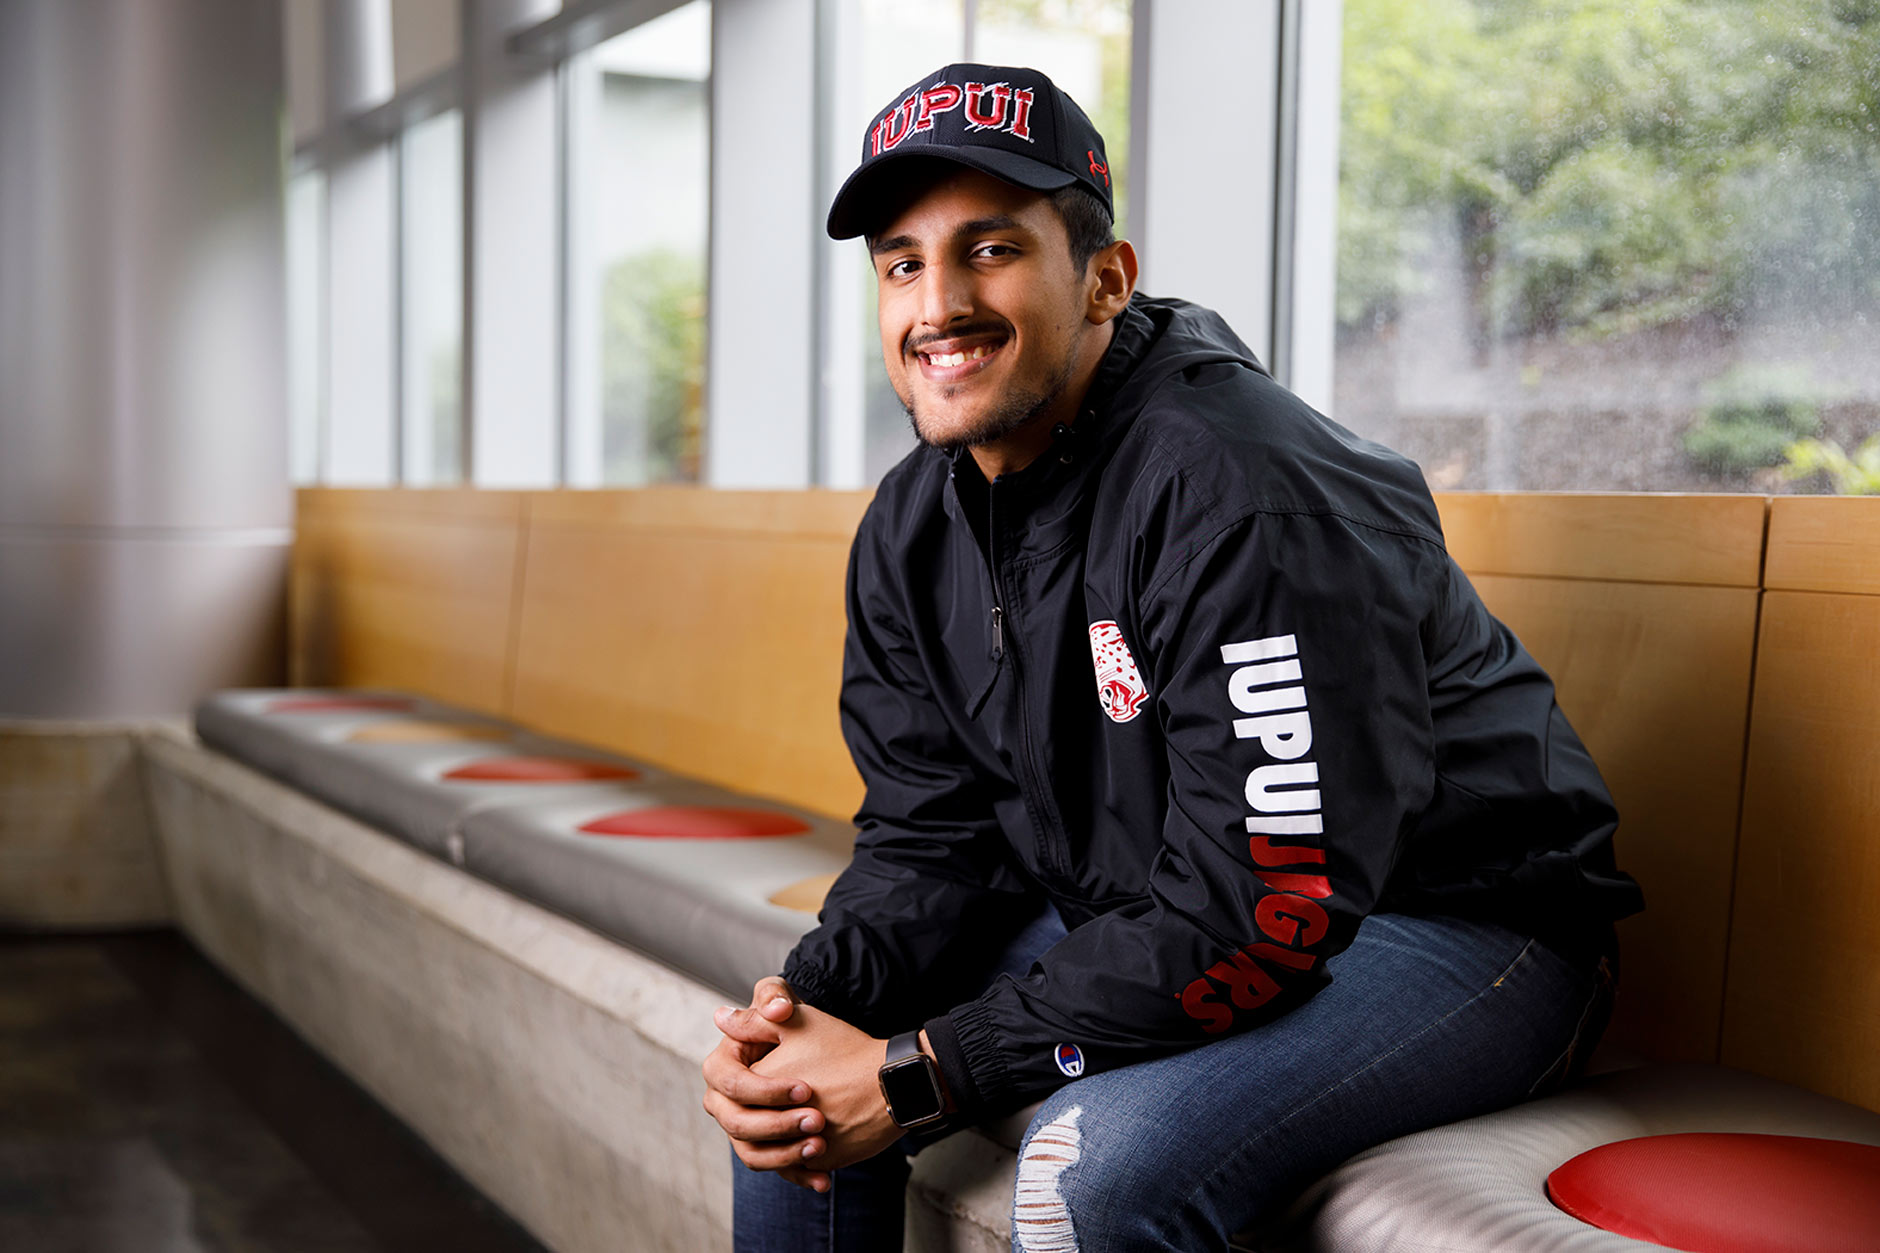 IUPUI student Joshua Khan poses for a portrait during a IUPUI apparel fashion photo shoot at the Campus Center on Wednesday, Aug. 8, 2018.